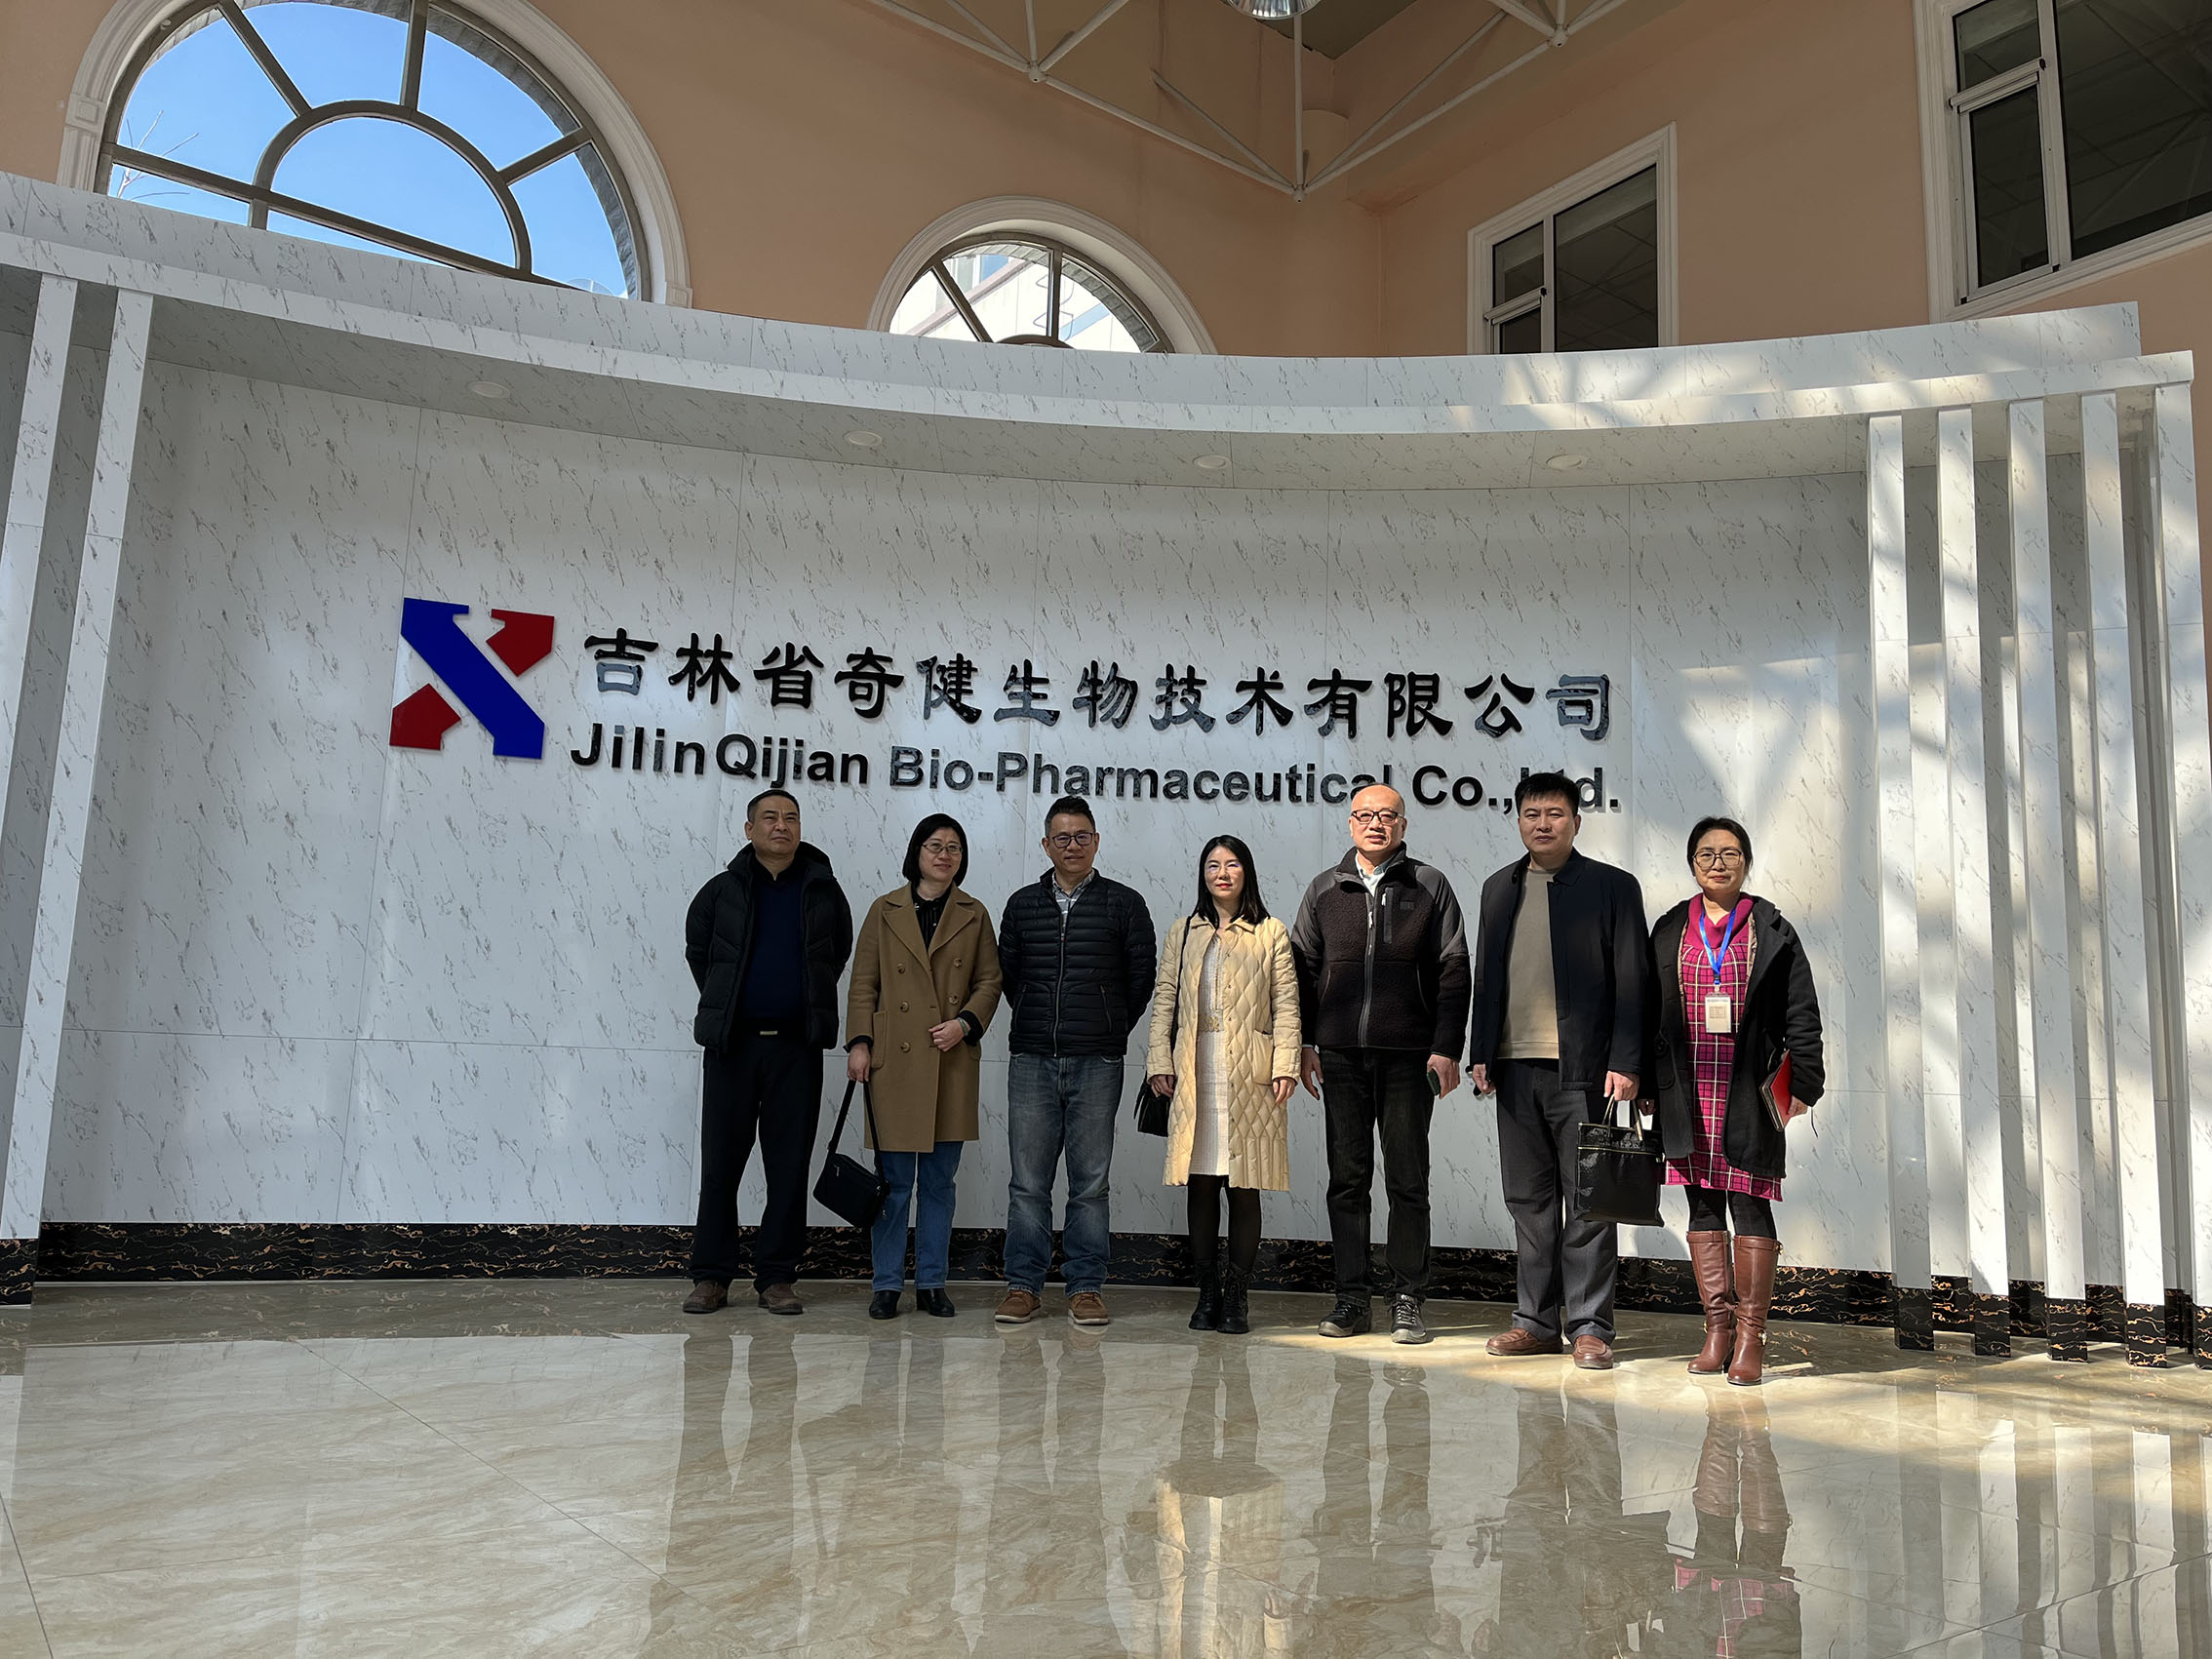 Welcome leaders of Jilin Provincial Department of Commerce to Qijian Bio-Pharmaceutical for investigation